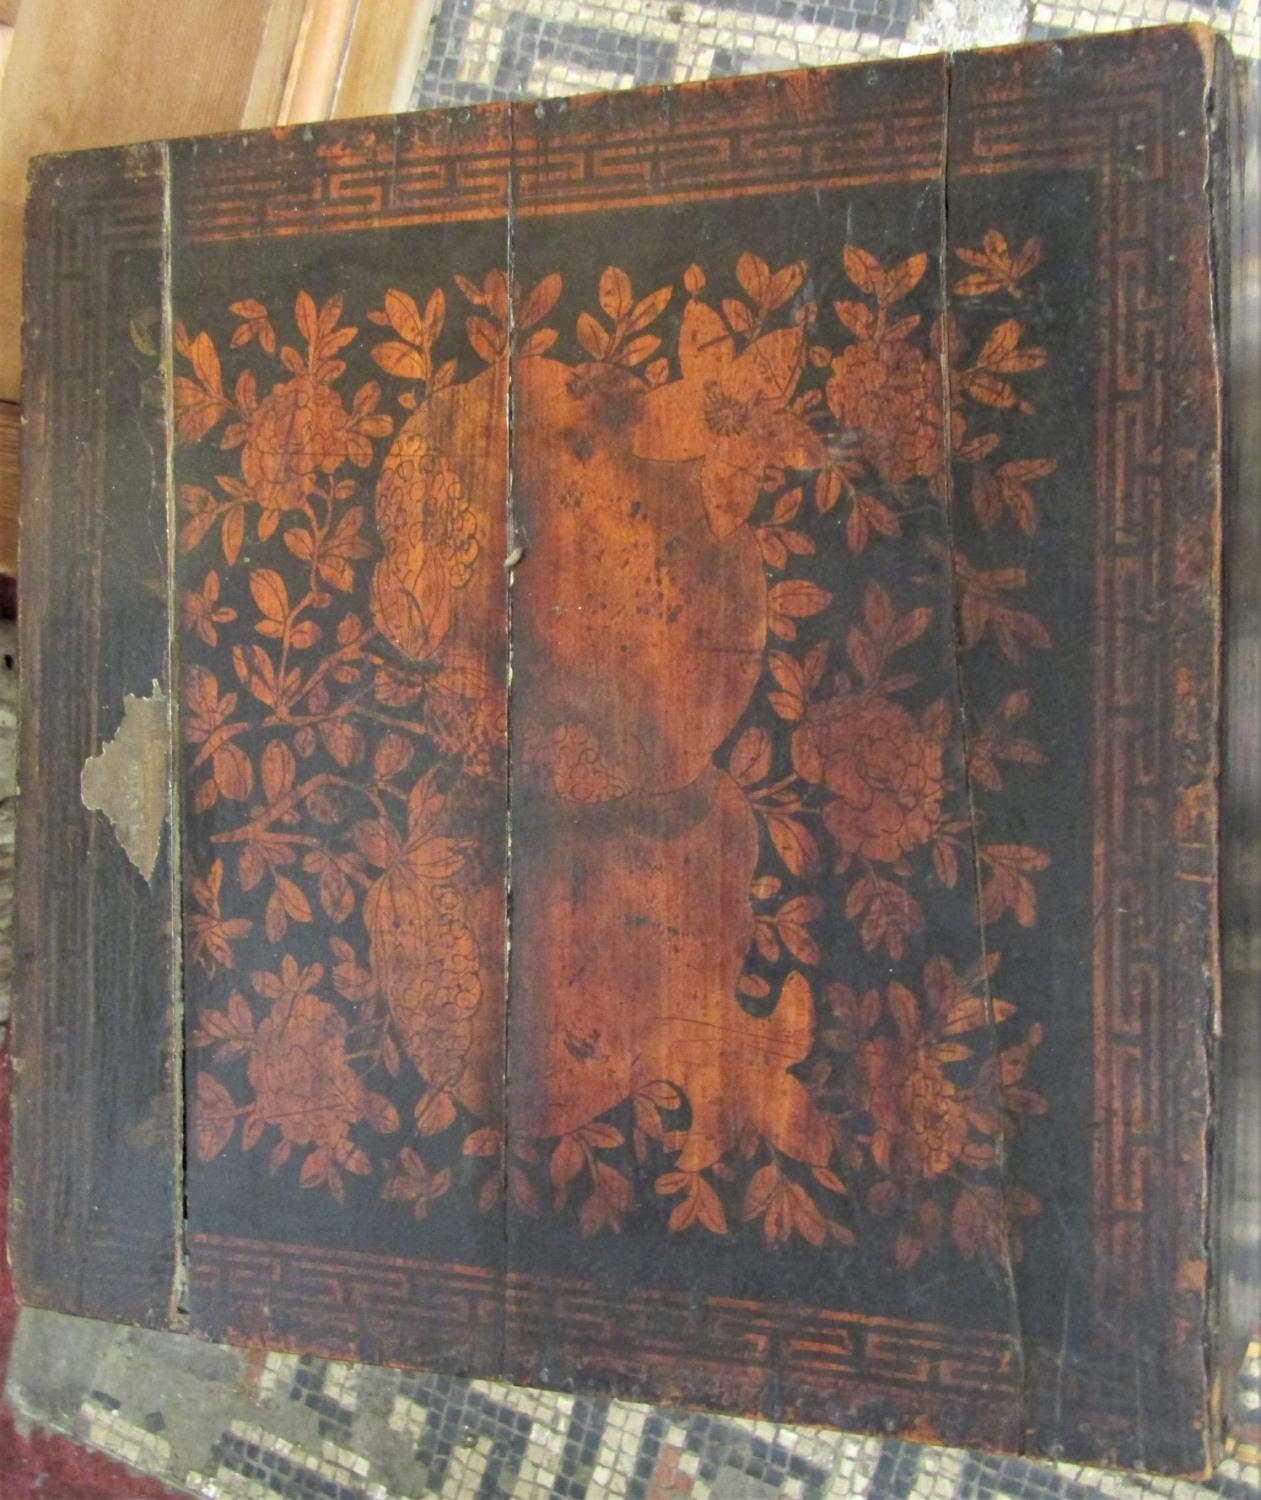 An antique Chinese lacquered wooden box with pen work detail of butterflies, flowers, Chinese - Image 2 of 2